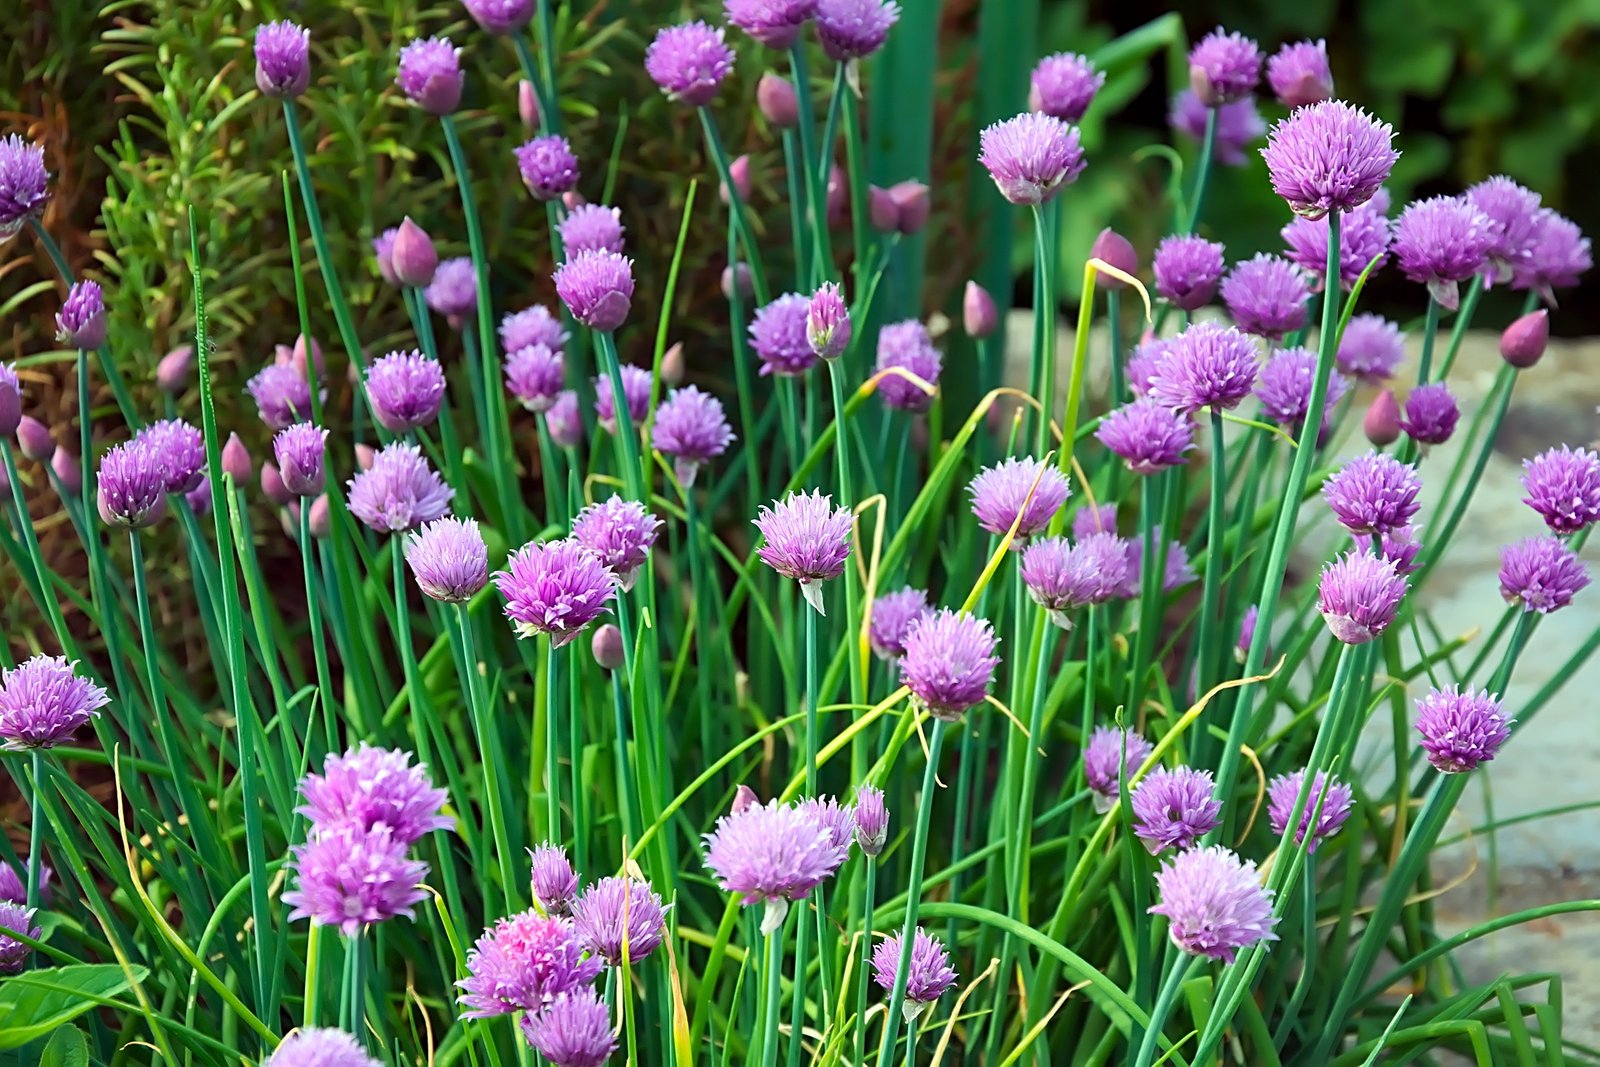 10 Simple Herbal Remedies From Your Garden - Chives